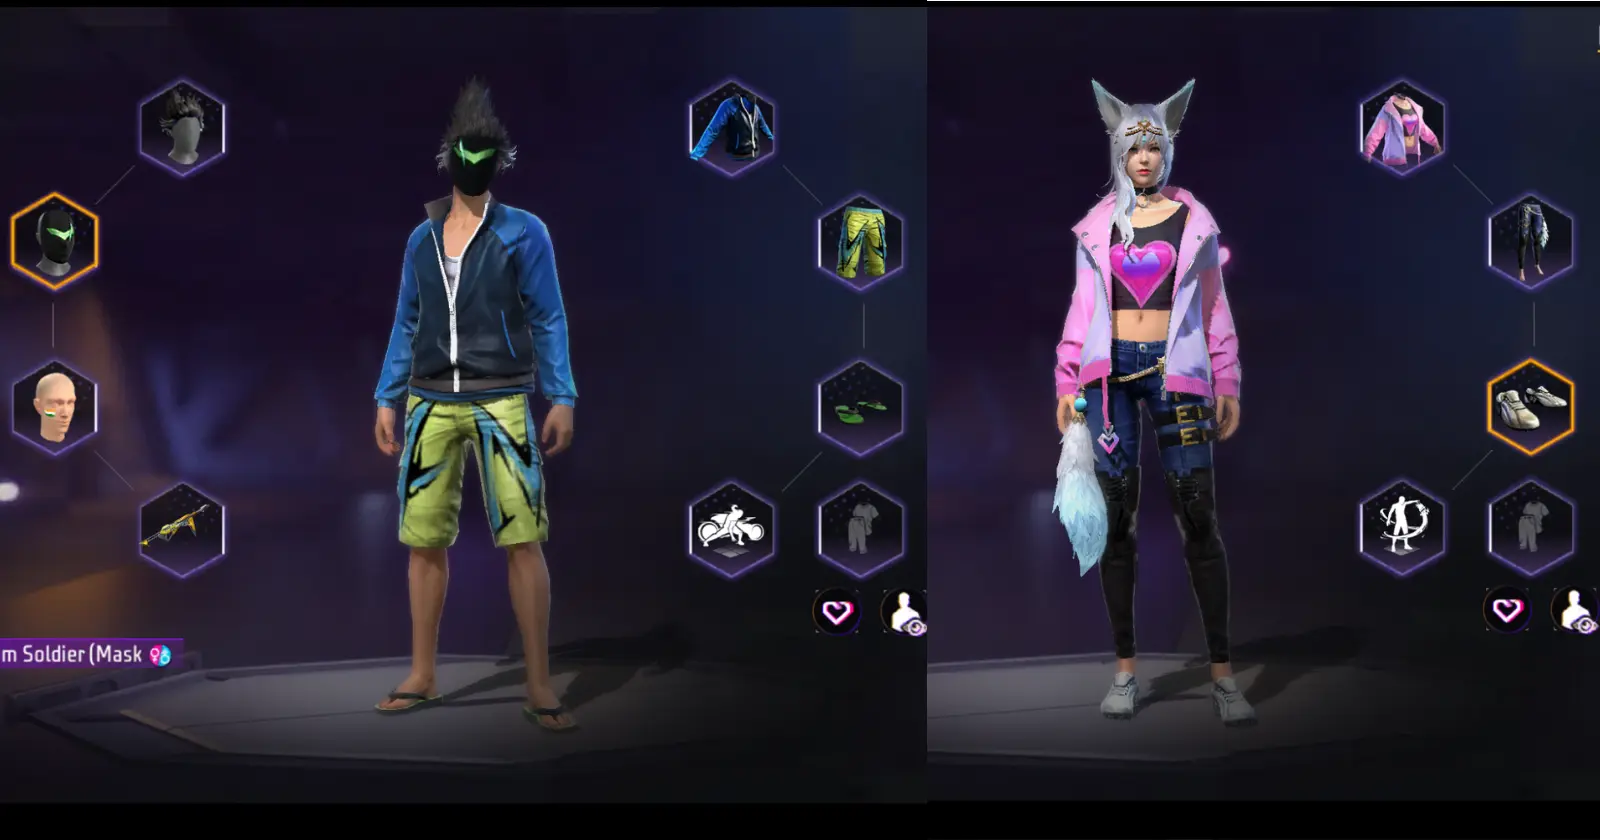 The male character on the left and the female character on the right wearing stylish dress combination in free fire game